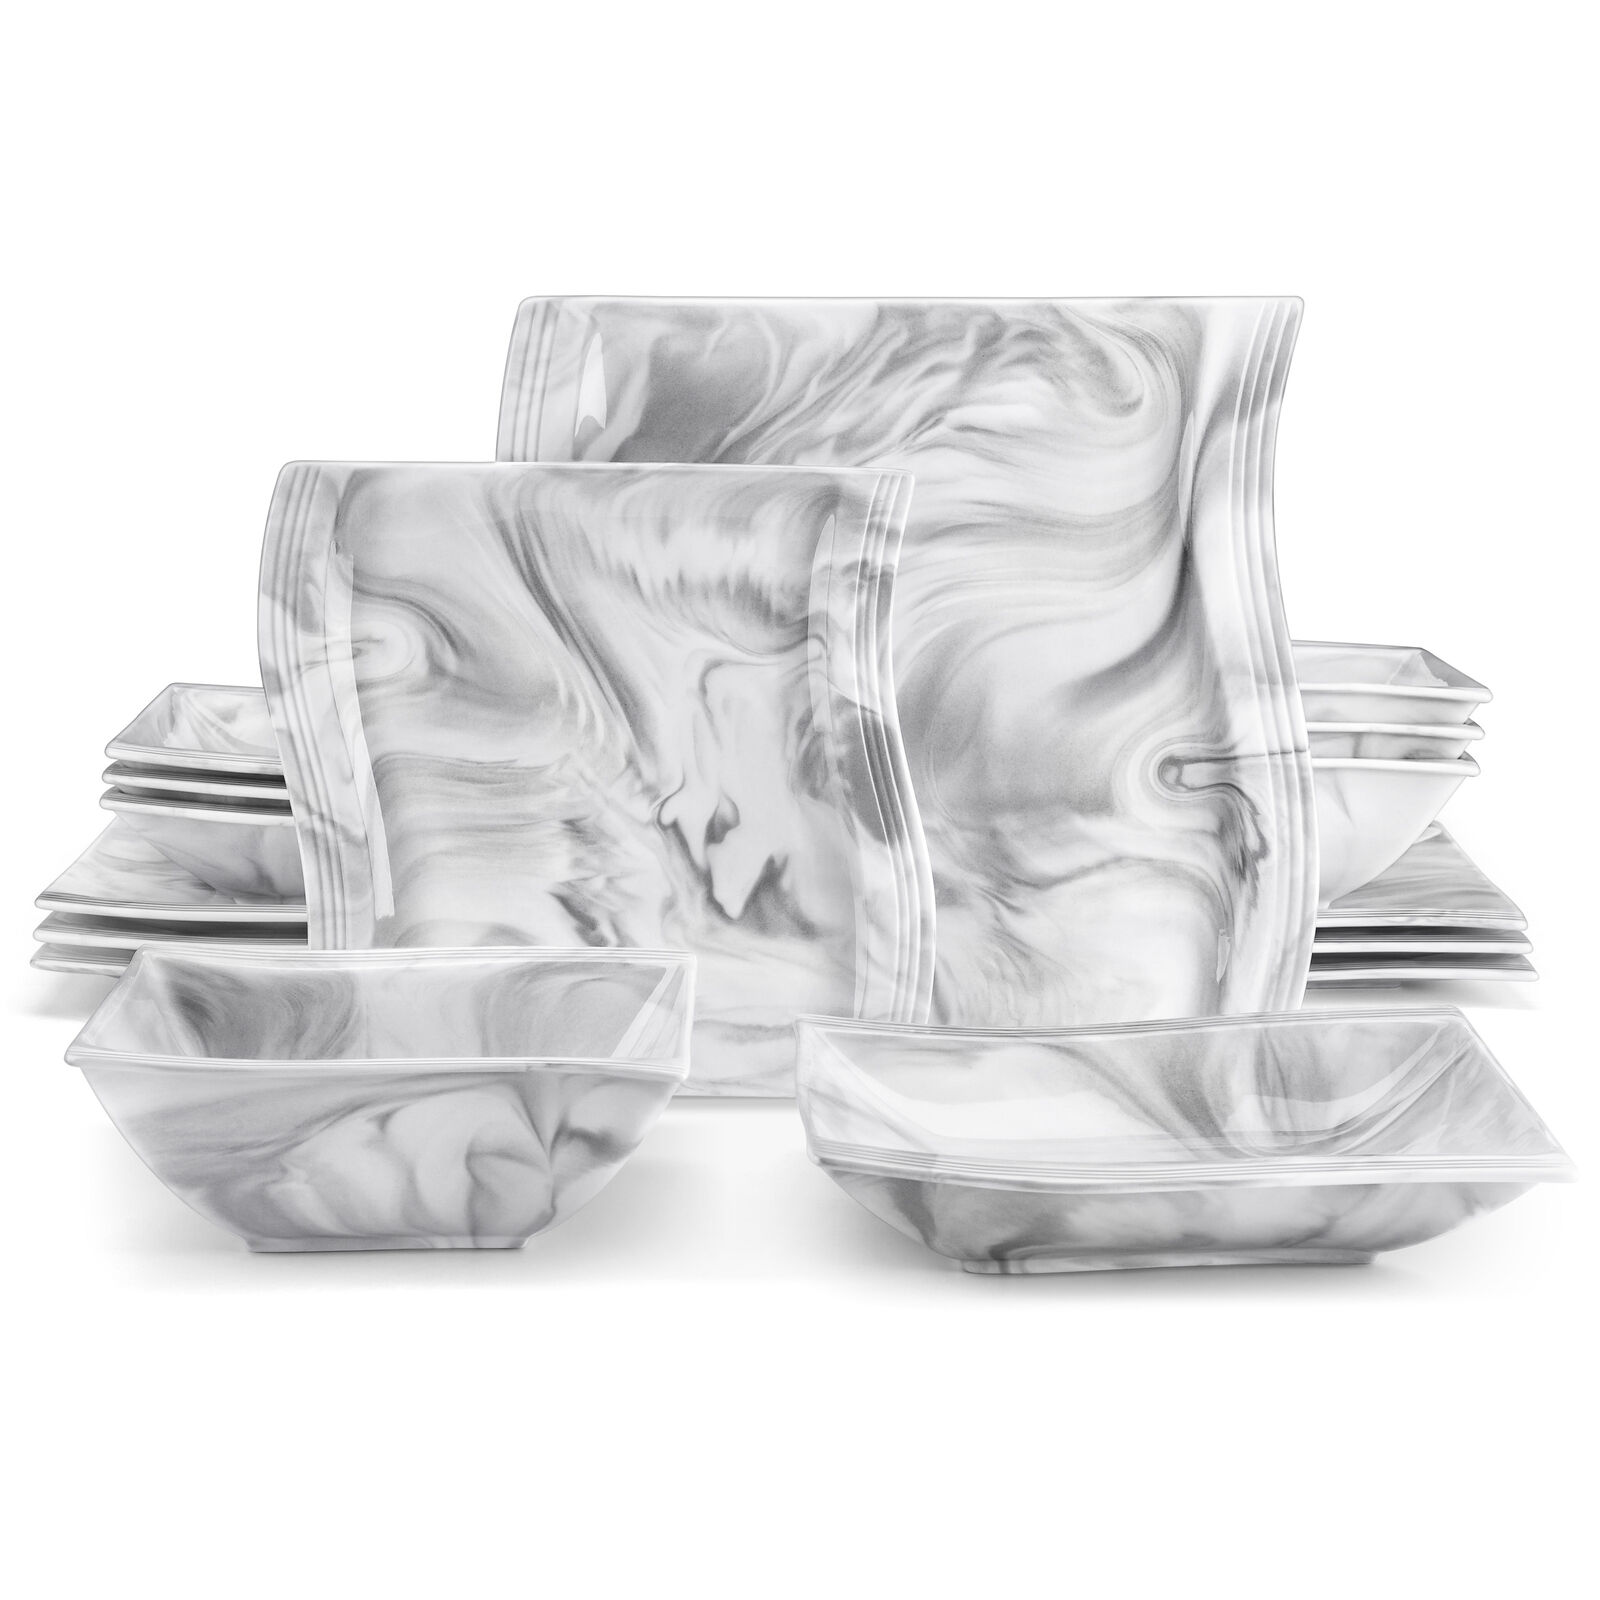 Malacasa Flora Marble Grey Porcelain Dinnerware Set Plates, Cups, Bowls,  And Saucers For 6 People Elegant Tableware Collection From Qg8i, $151.05